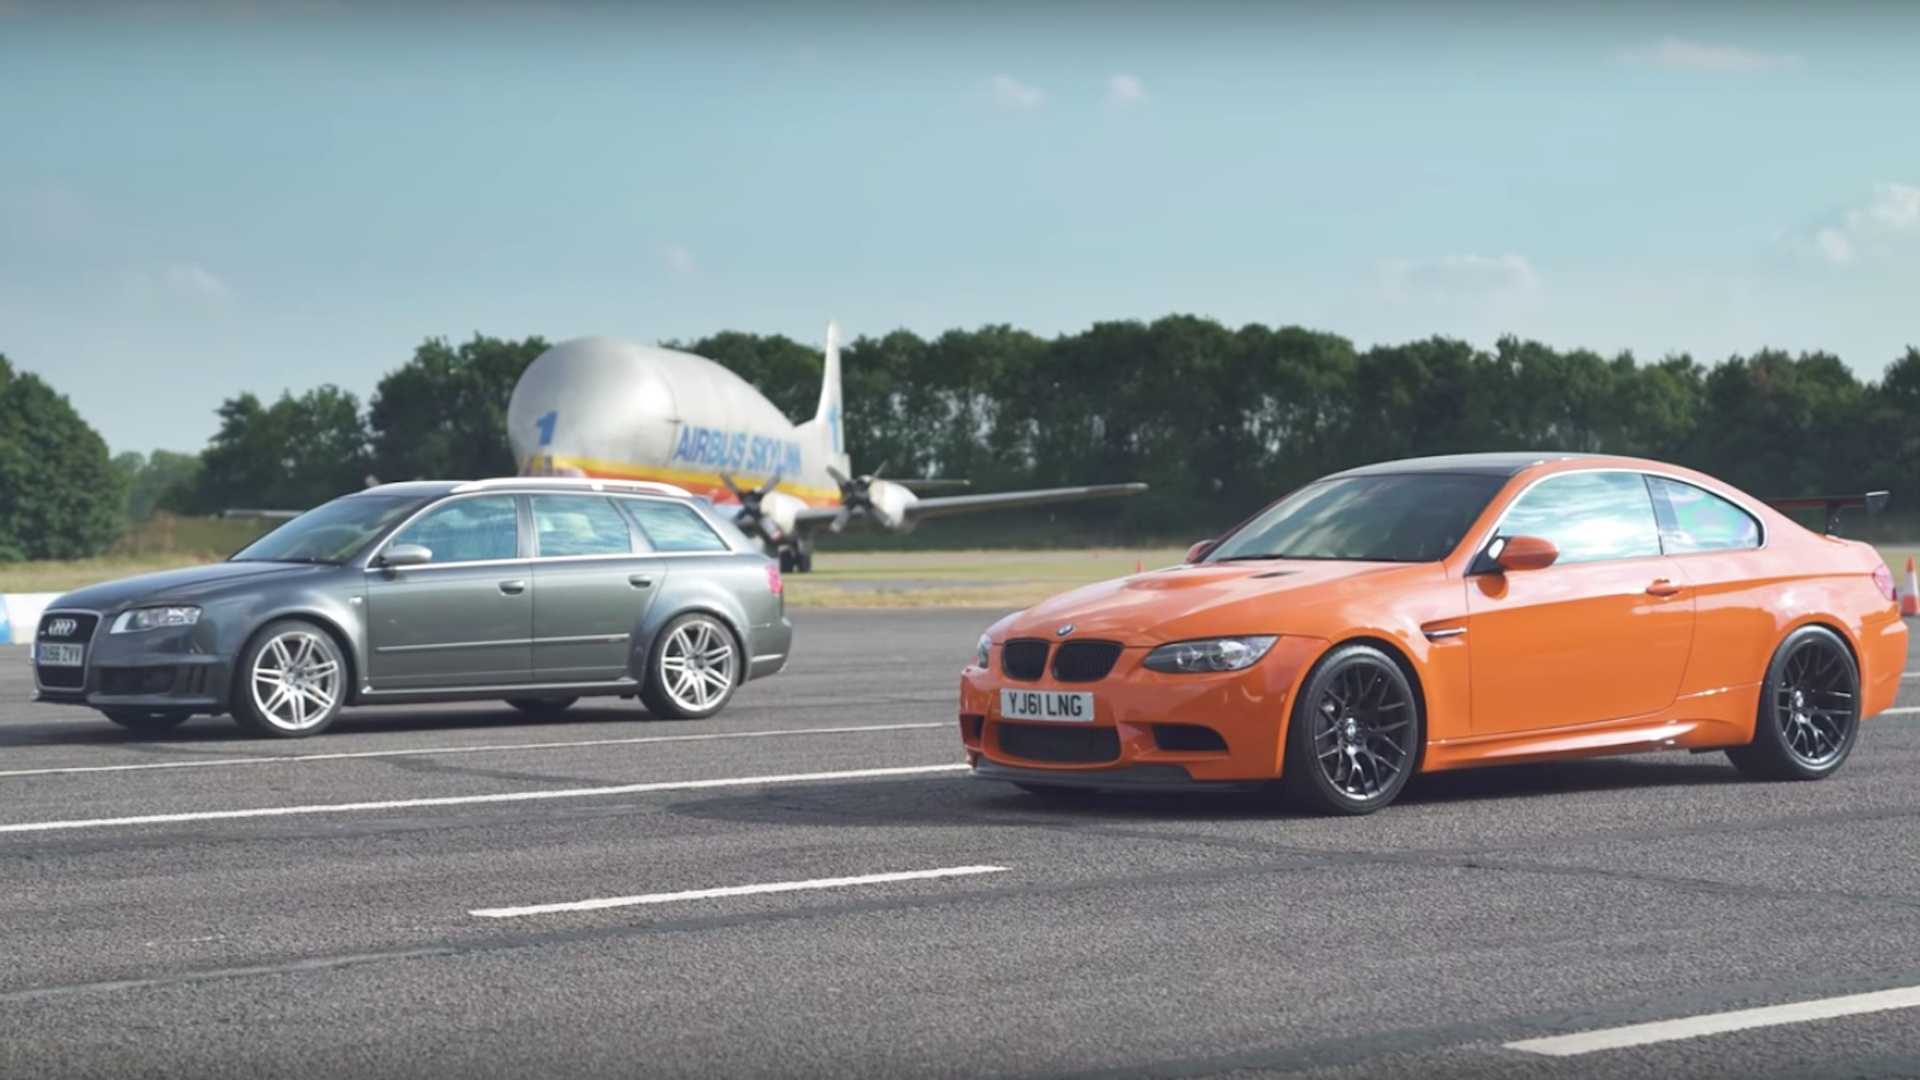 BMW E92 M3 GTS faces Audi RS4 B7 in drag race